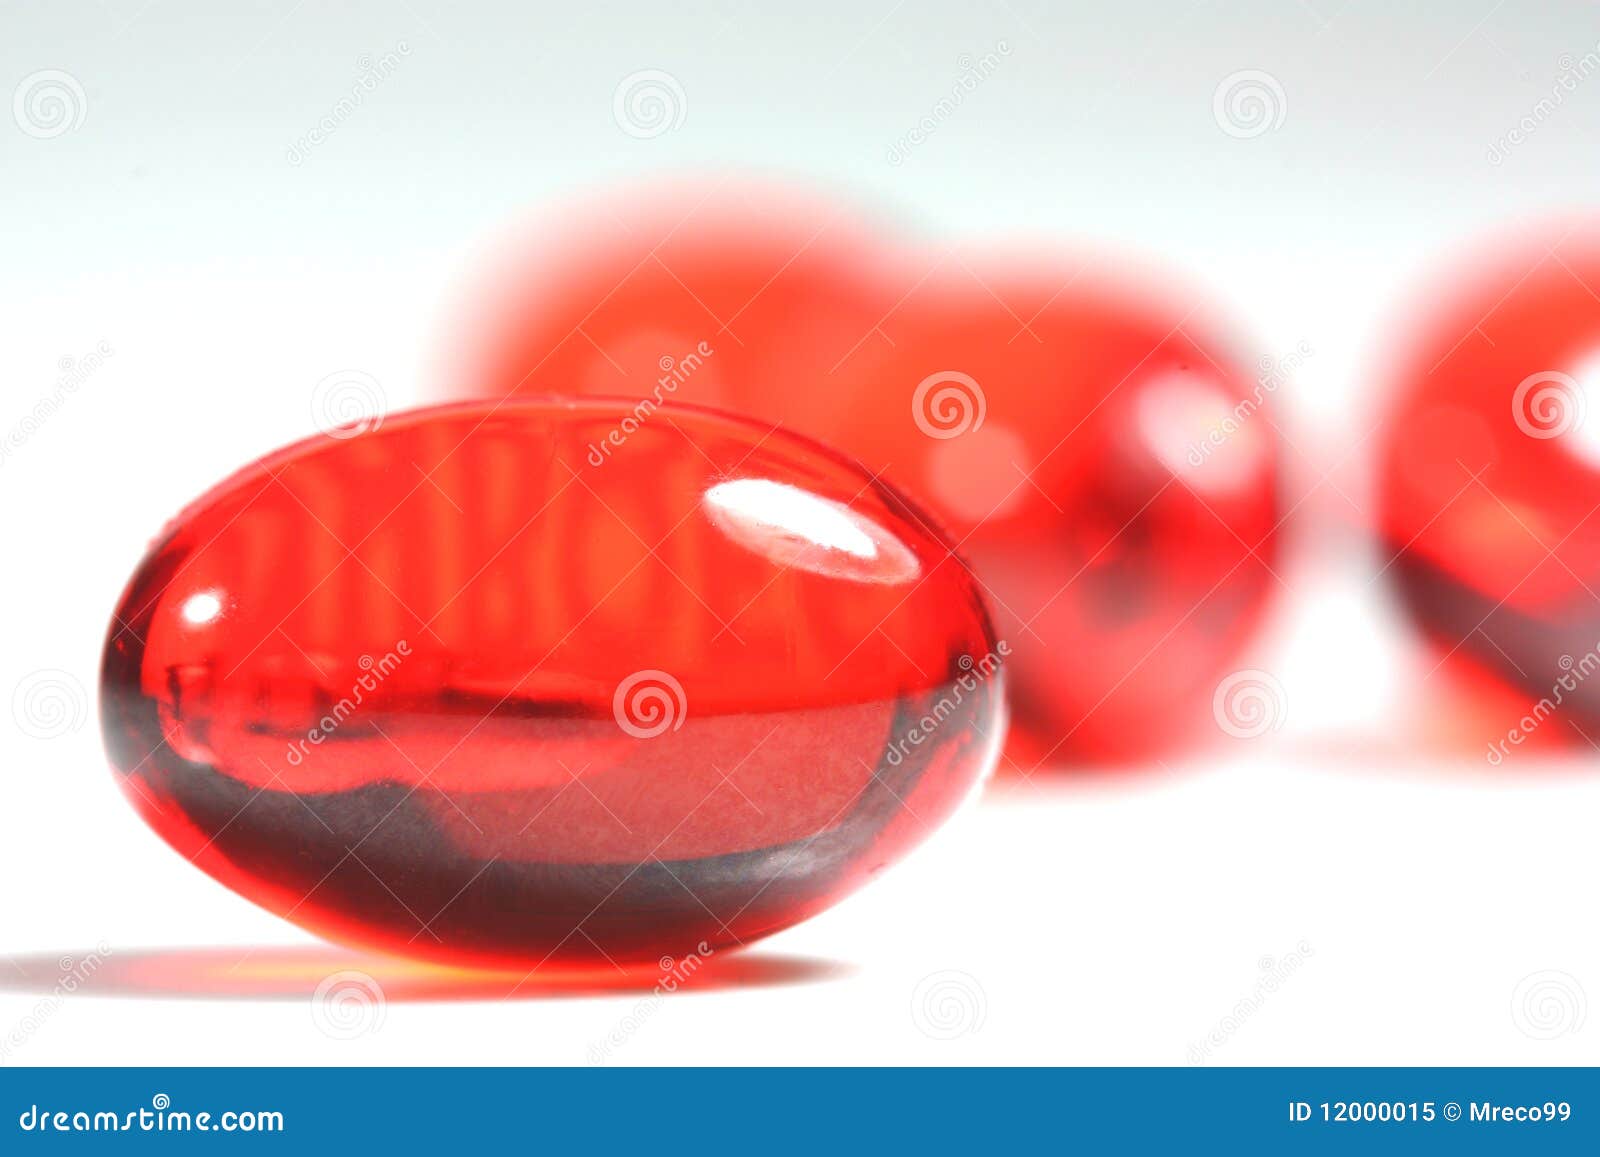 Red capsule pills stock image. Image of liquid, tablets - 12000015